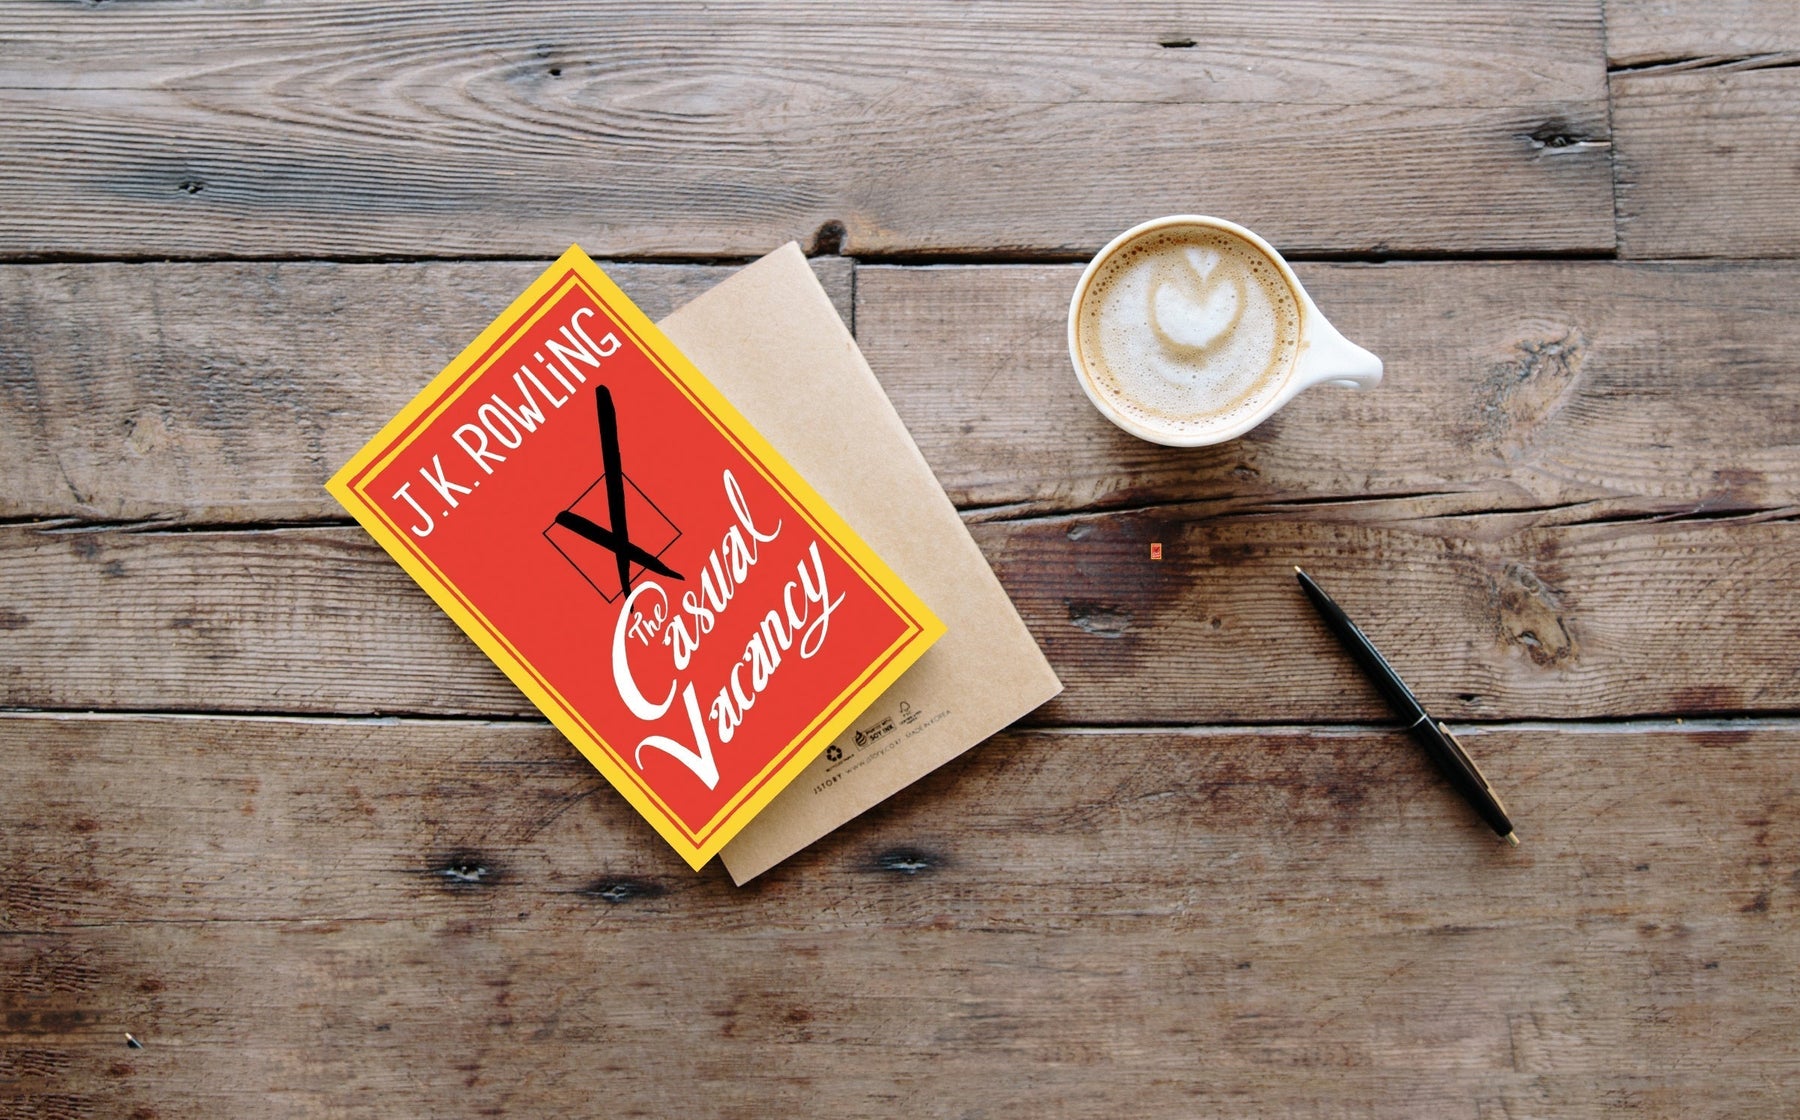 The Casual Vacancy by J. K. Rowling Online Book Store – Bookends